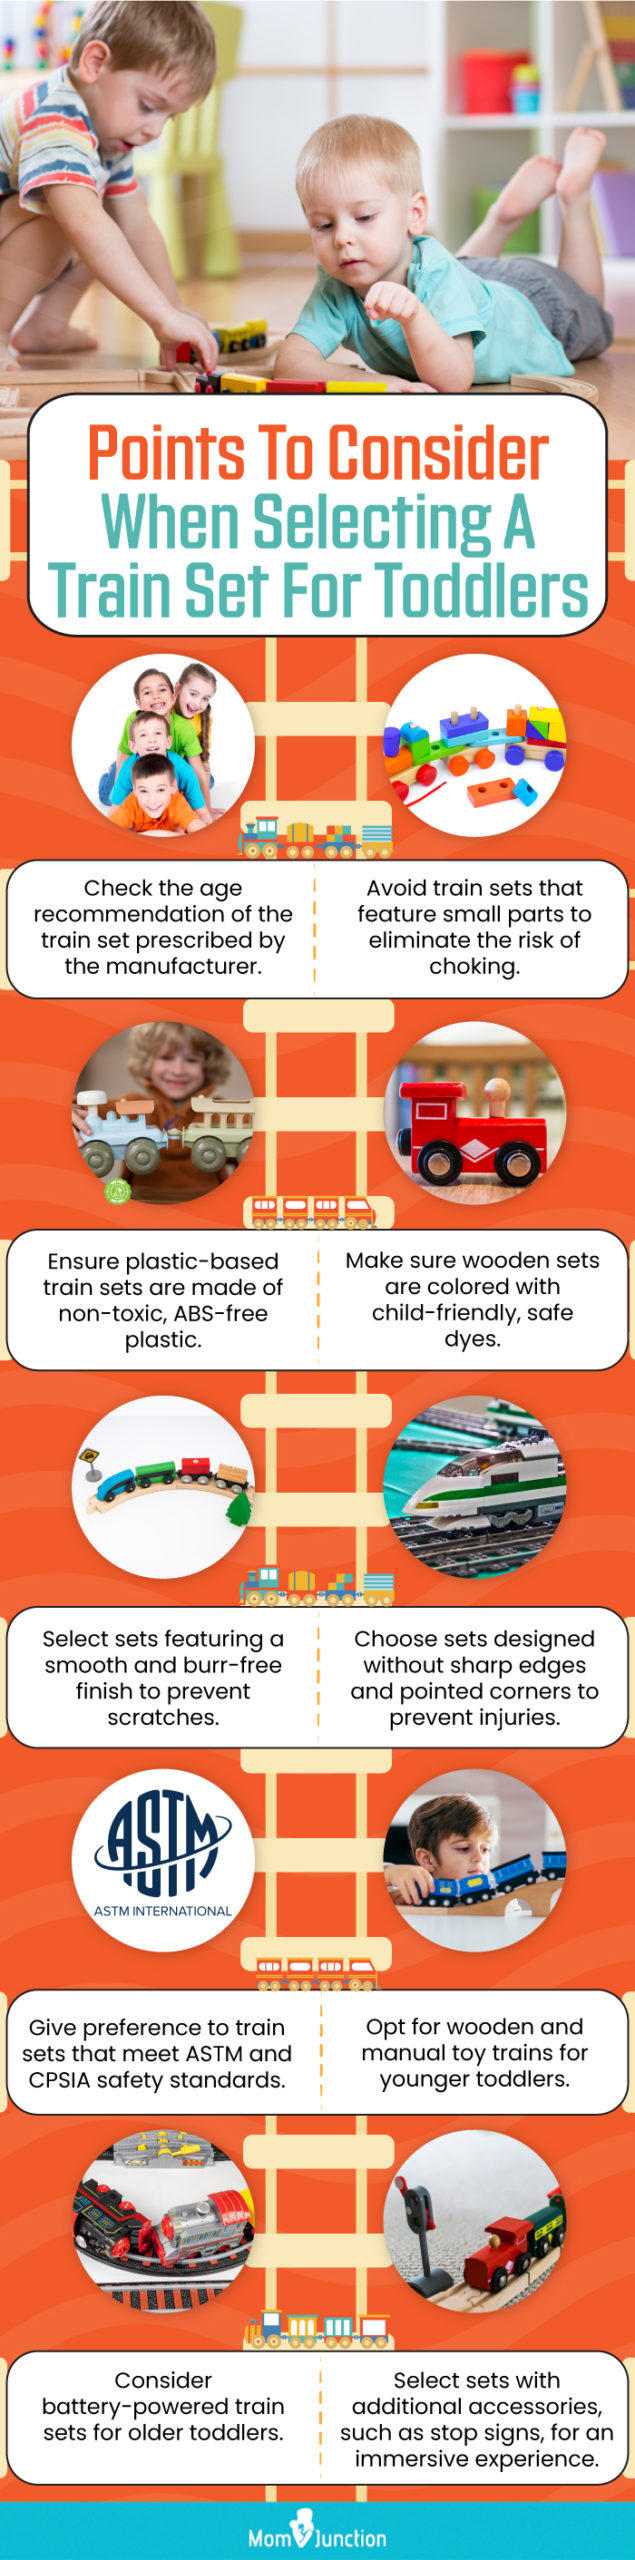 Points To Consider When Selecting A Train Set For Toddlers (infographic)